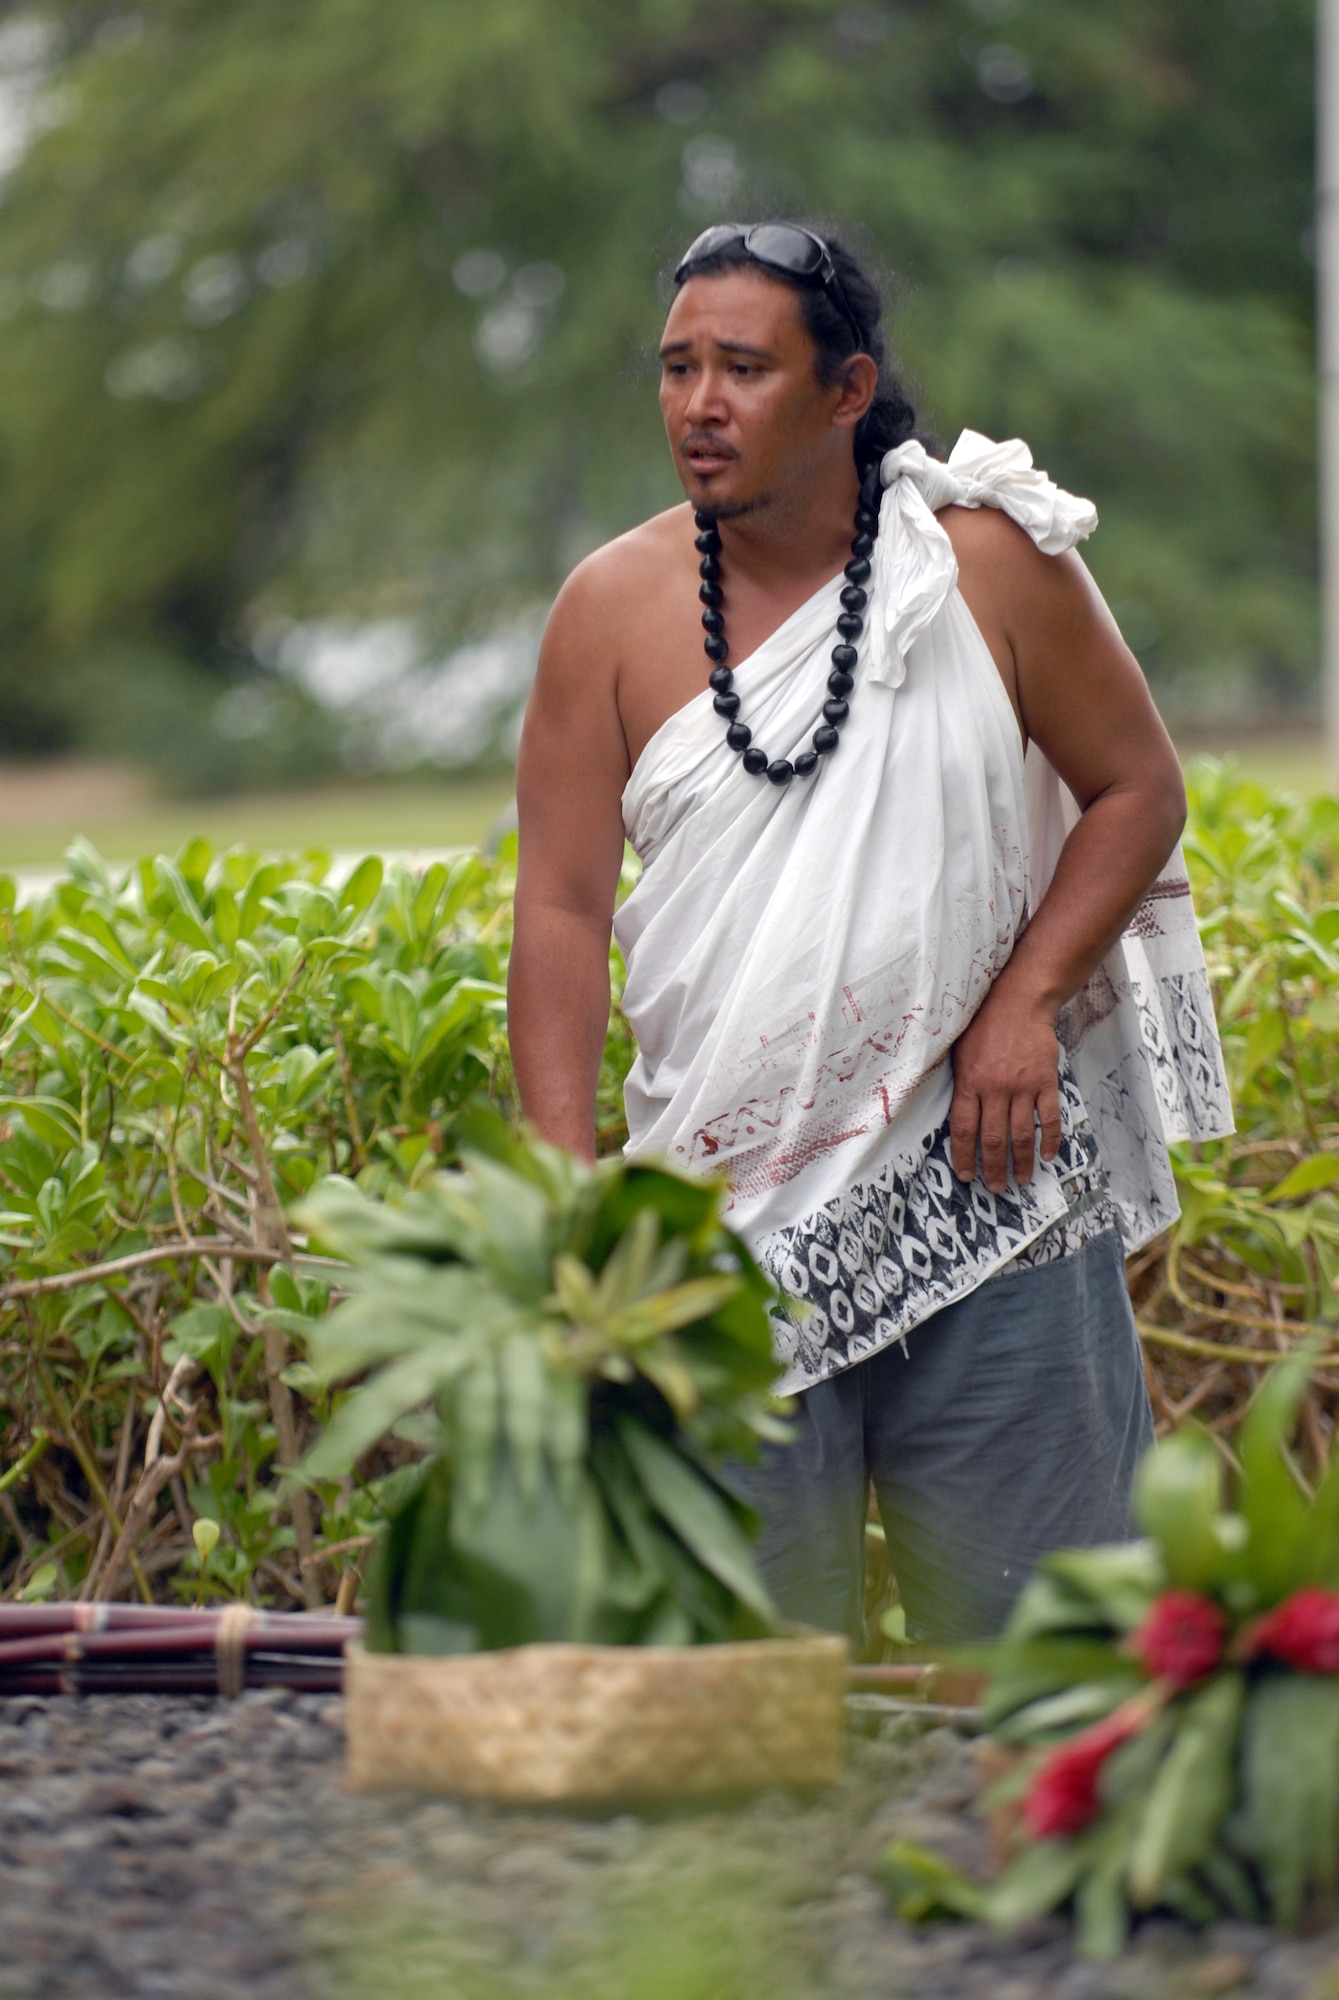 HICKAM AIR FORCE BASE, Hawaii -- Braven Canibog, chants an Oli, or a blessing, in the native Hawaiian language  at the Haleamau Halealoha Burial after the Makahiki Festival here, Nov. 14. The gifts were set on the burial to respect and honor the ancestors of Hawaiians who came before them. (U.S. Air Force photo/Senior Airman Gustavo Gonzalez)